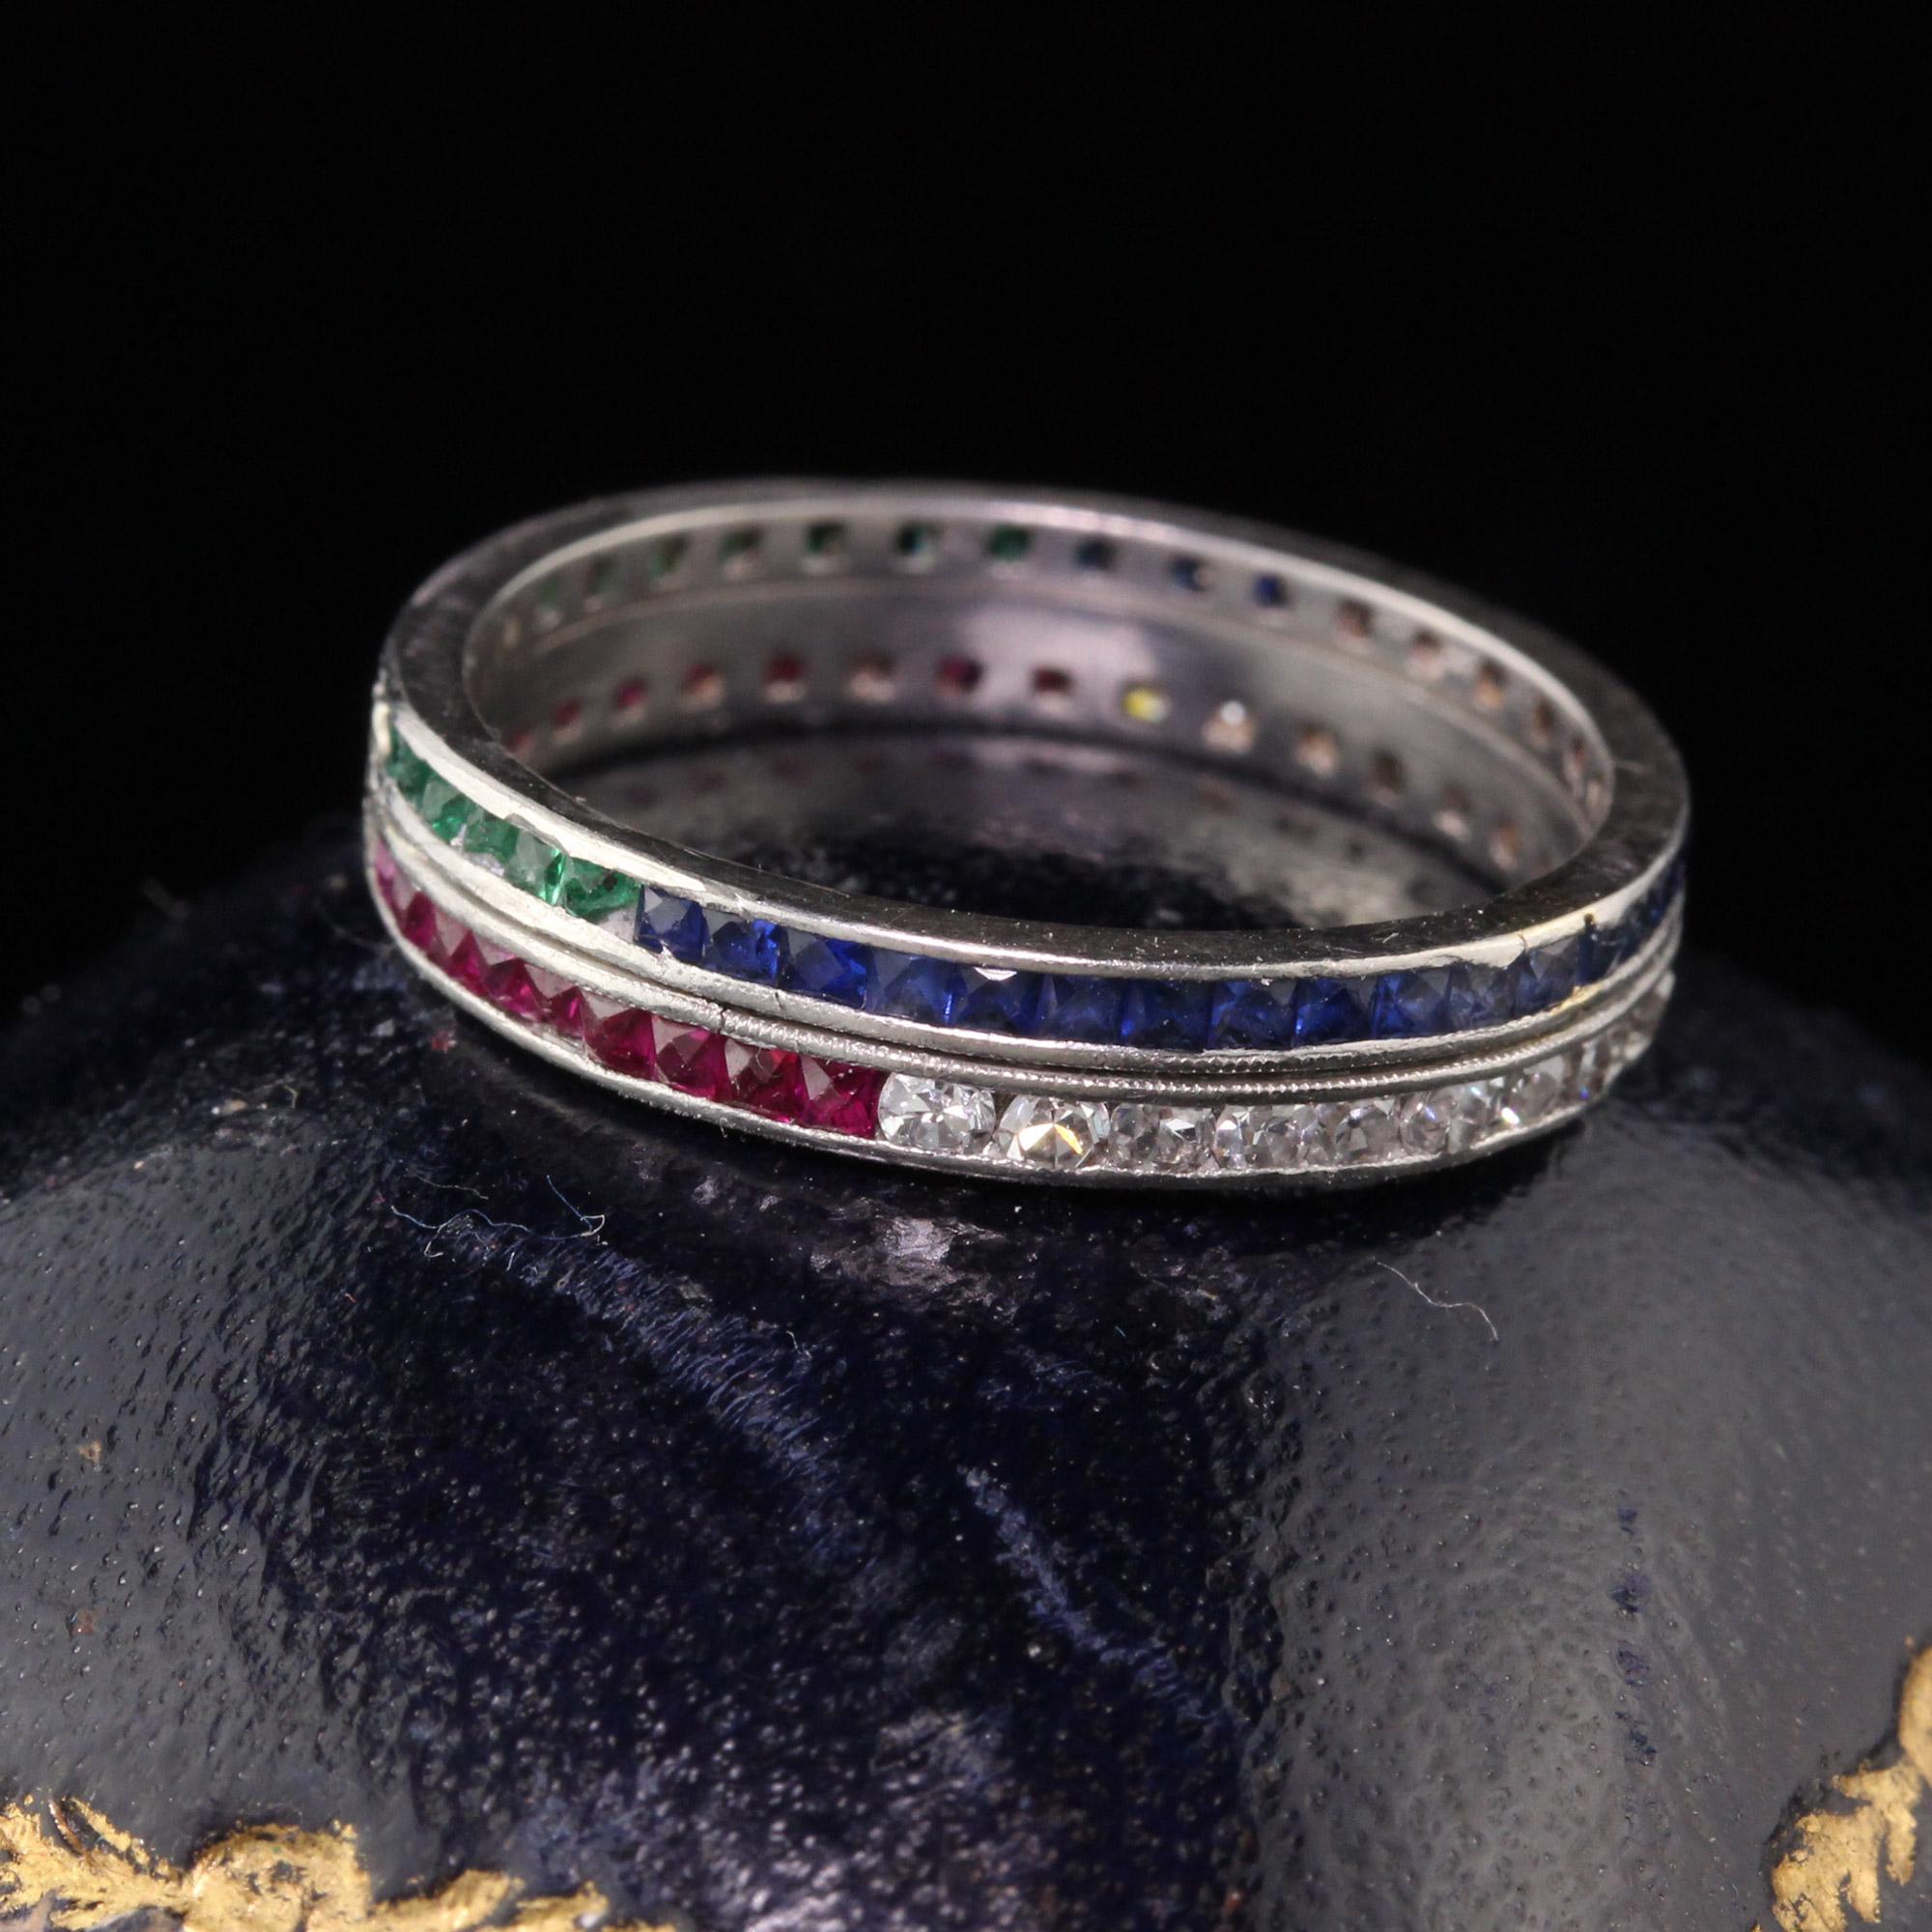 Incredible, unique, one of a kind vintage double row eternity band with one row of french cut sapphires & emeralds and another row of single cut diamonds and french cut rubies. We've never seen another like it! can be worn at different positions to